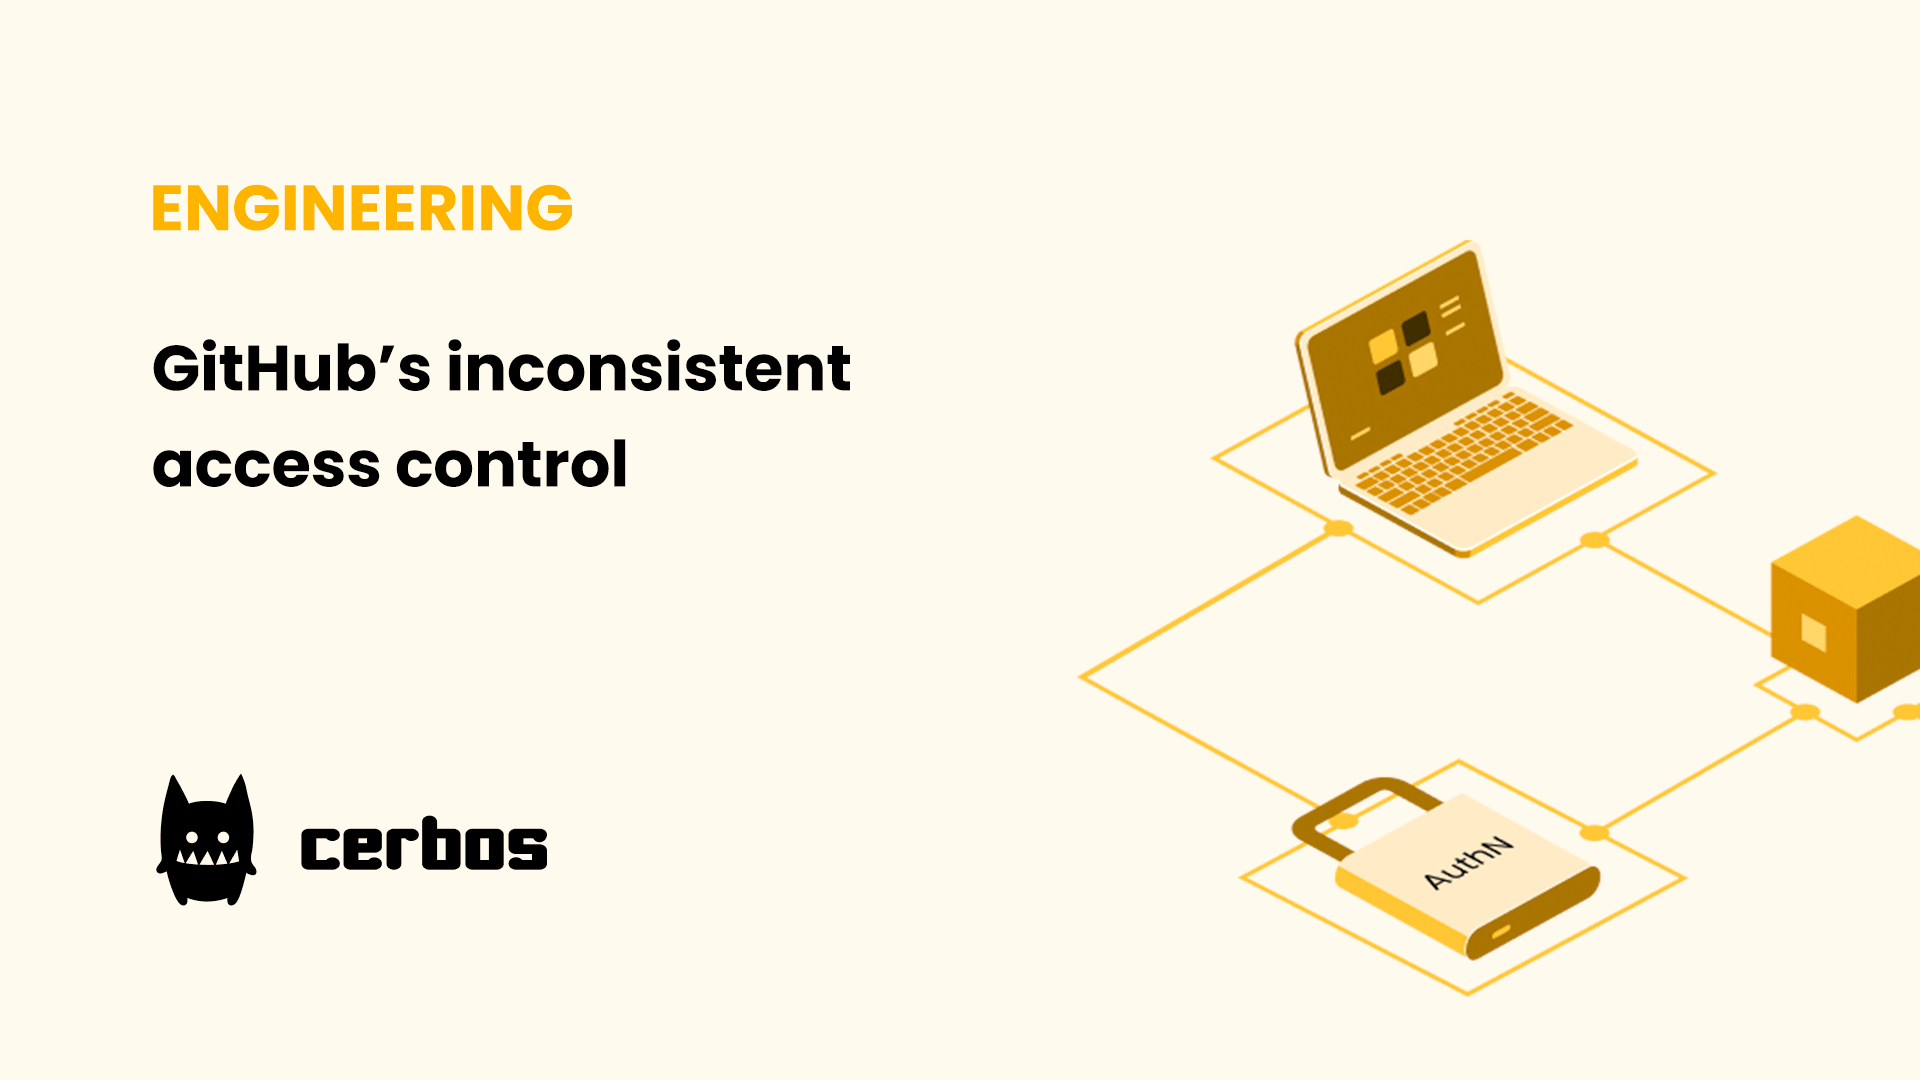 GitHub’s inconsistent access control